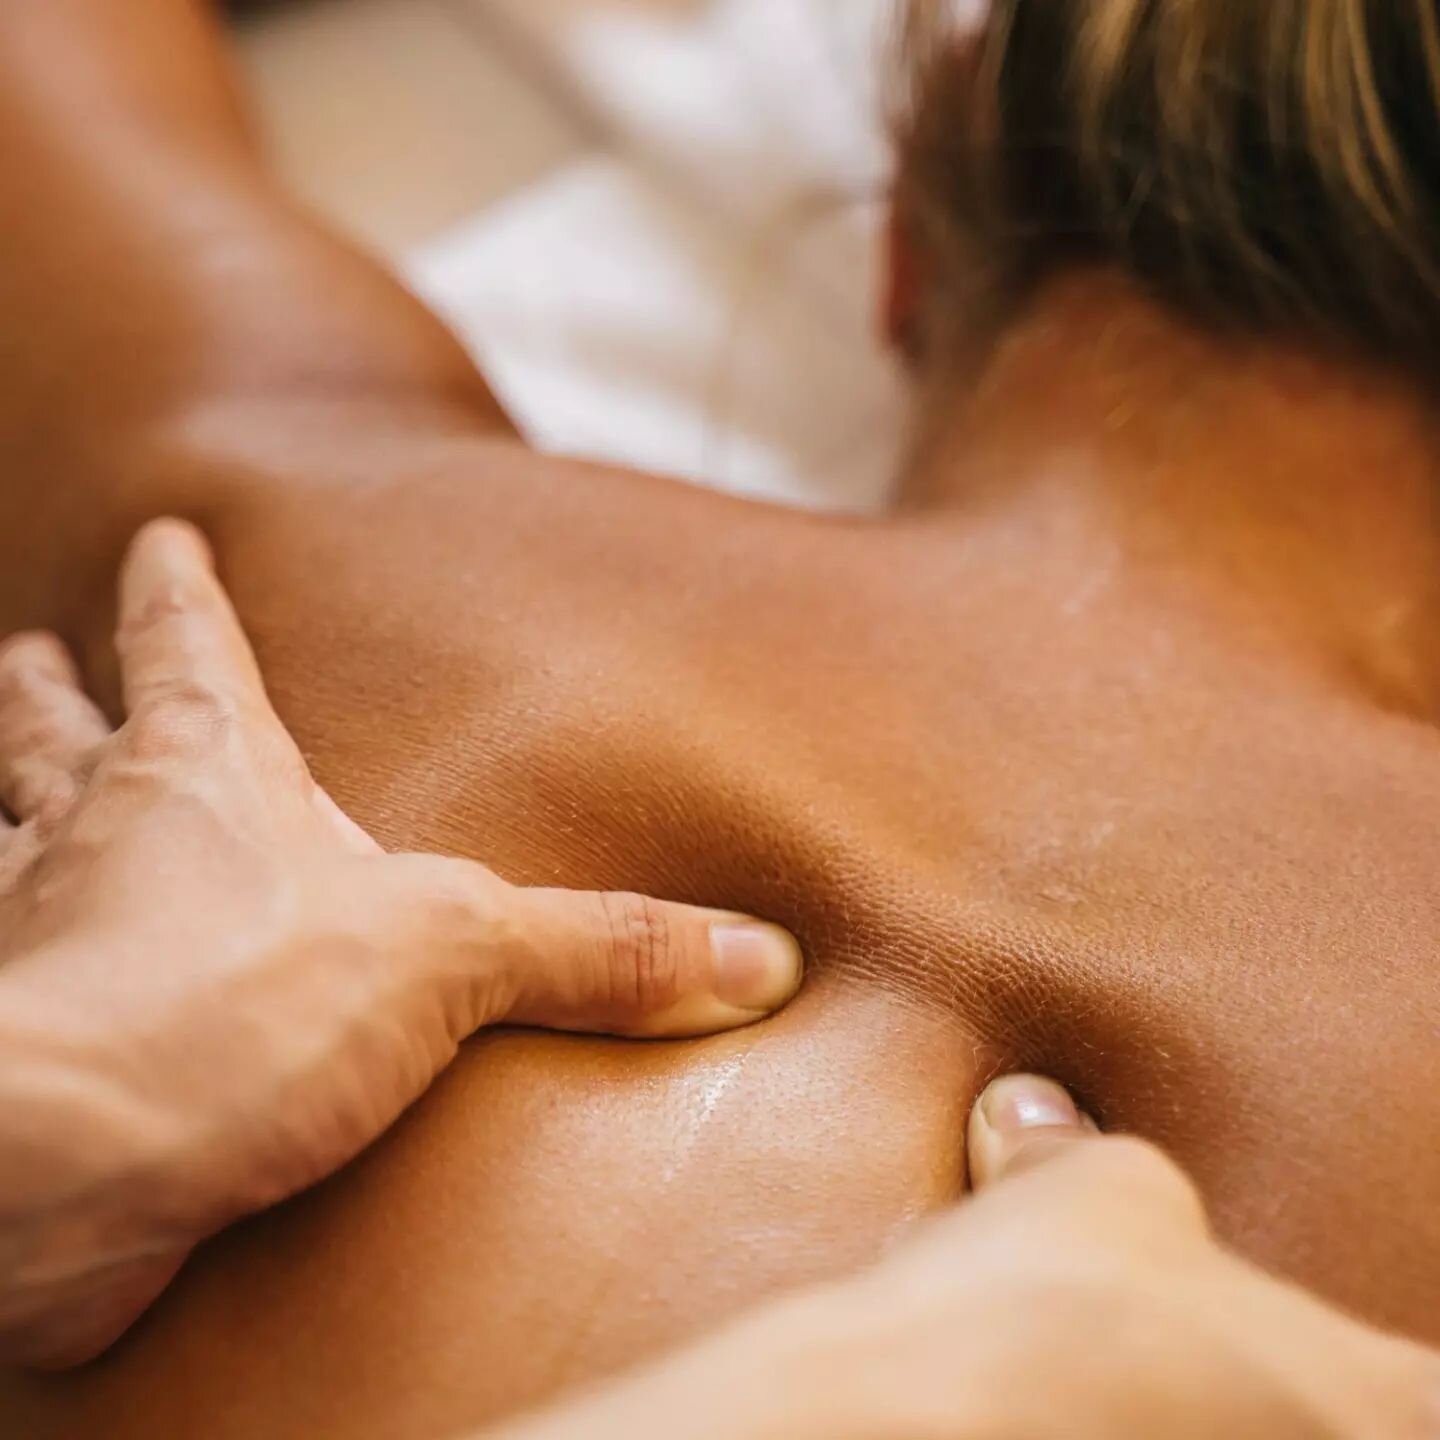 Did you know all the benefits of deep tissue massage? We can all say relaxation and stress reliever but there's more.

Let's start with pain, deep tissue work reduces chronic pain, plantar fasciatis, fibromyalgia, stiff neck, back pain, pain from dig